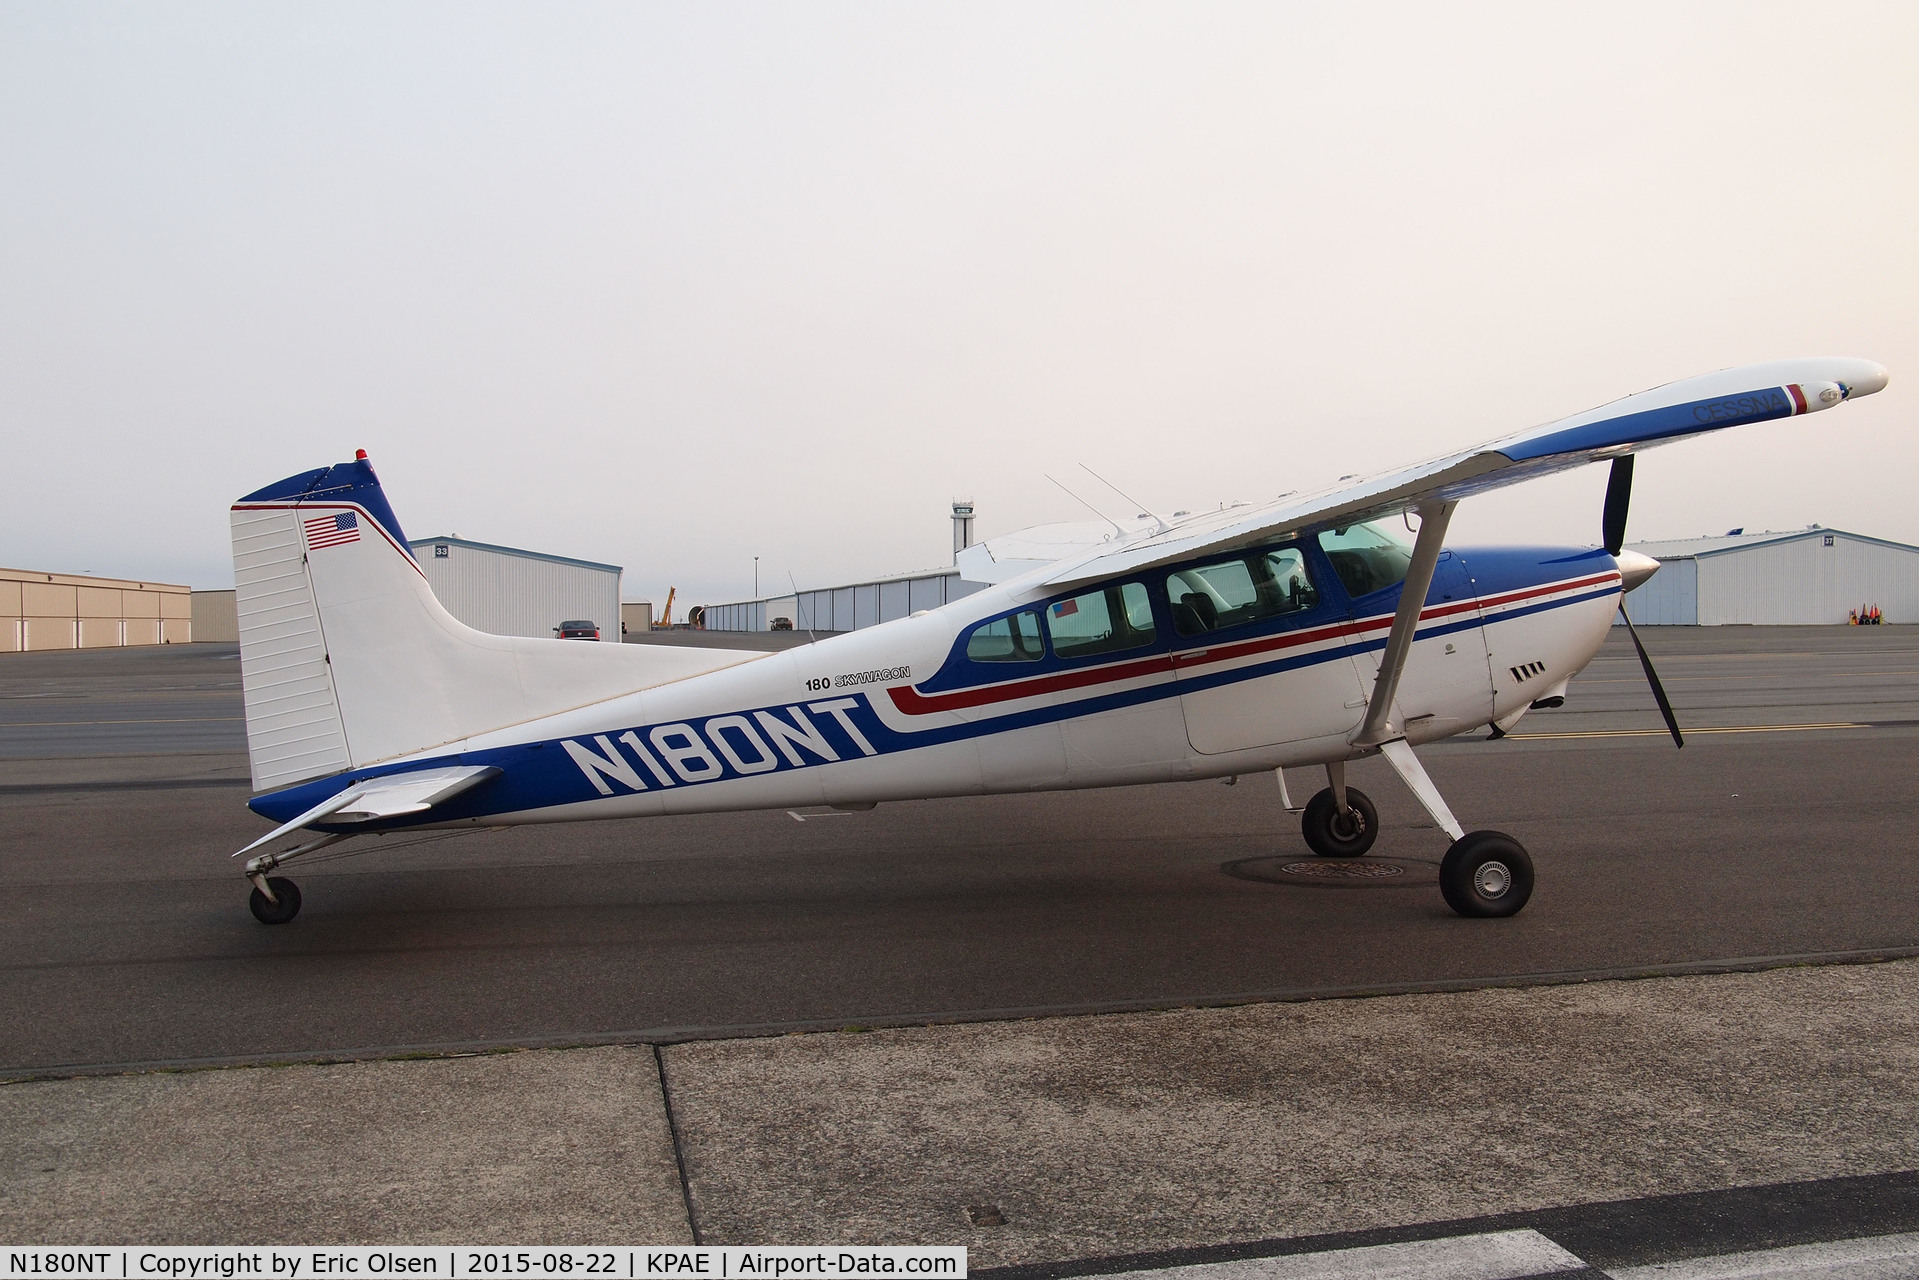 N180NT, 1977 Cessna 180K Skywagon C/N 18052813, Cessna 180K that was part of Challenge Air 2015 at Paine Field